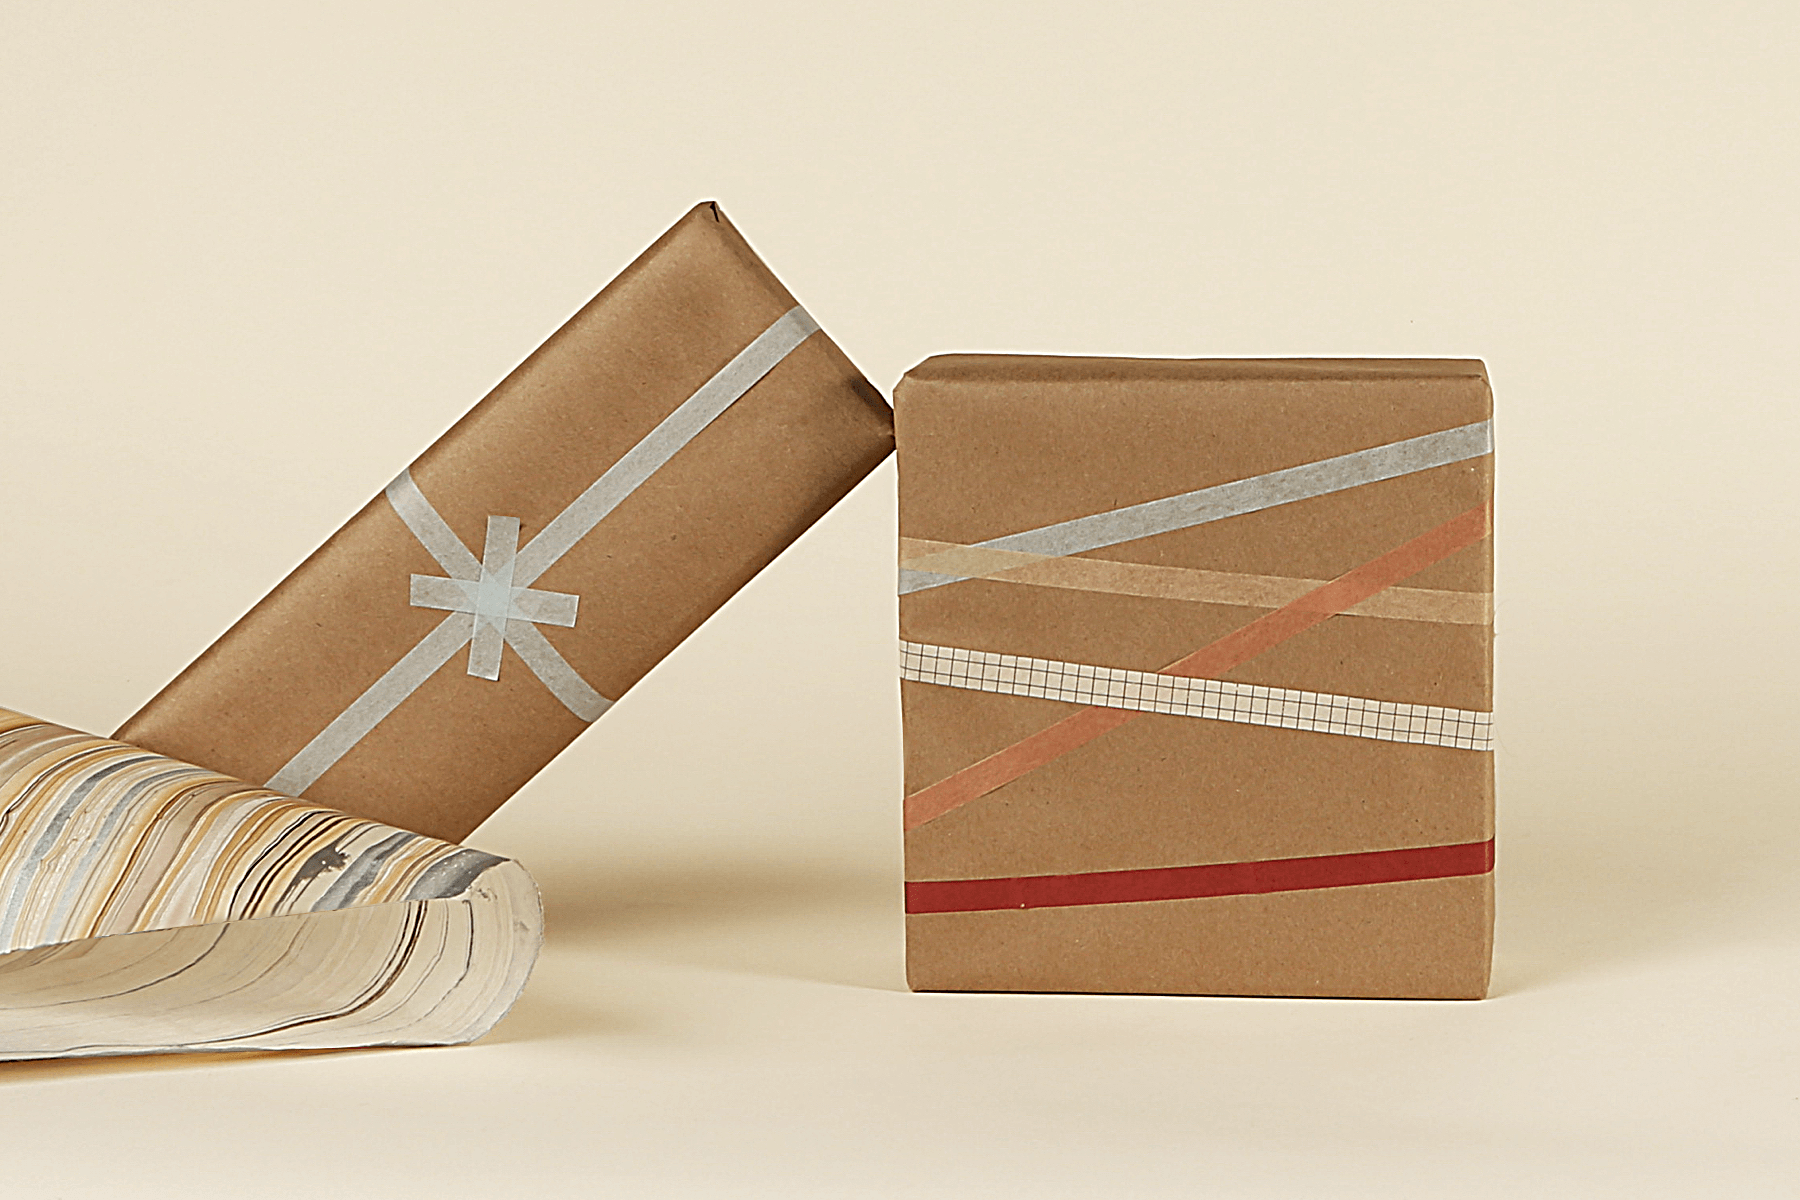 Stack of eco-friendly wrapped gifts on a beige background.